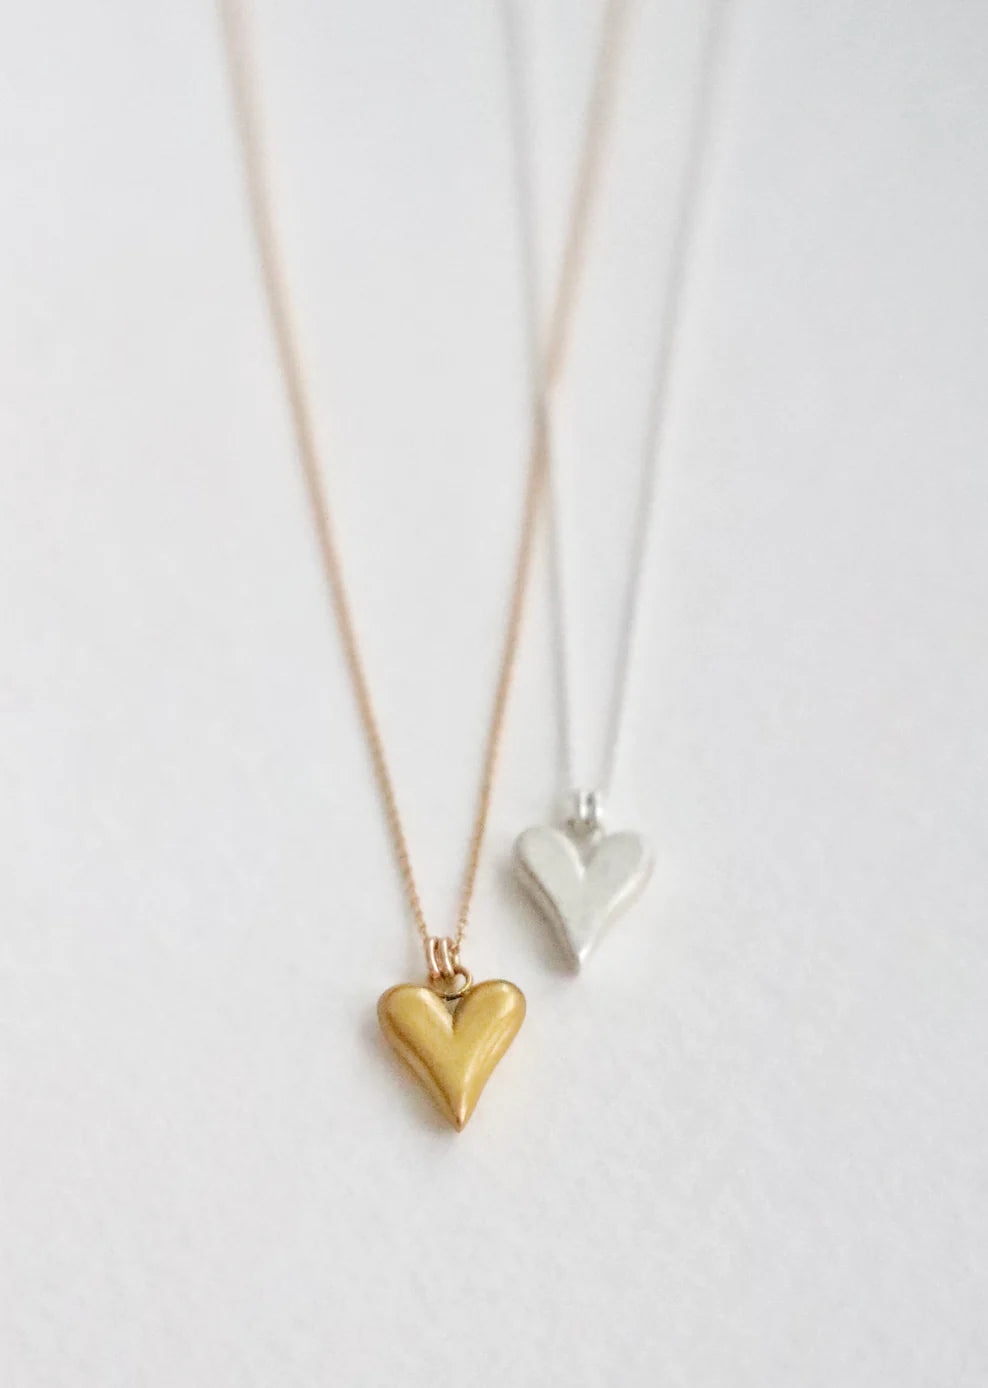 Prayer in Your Heart necklace